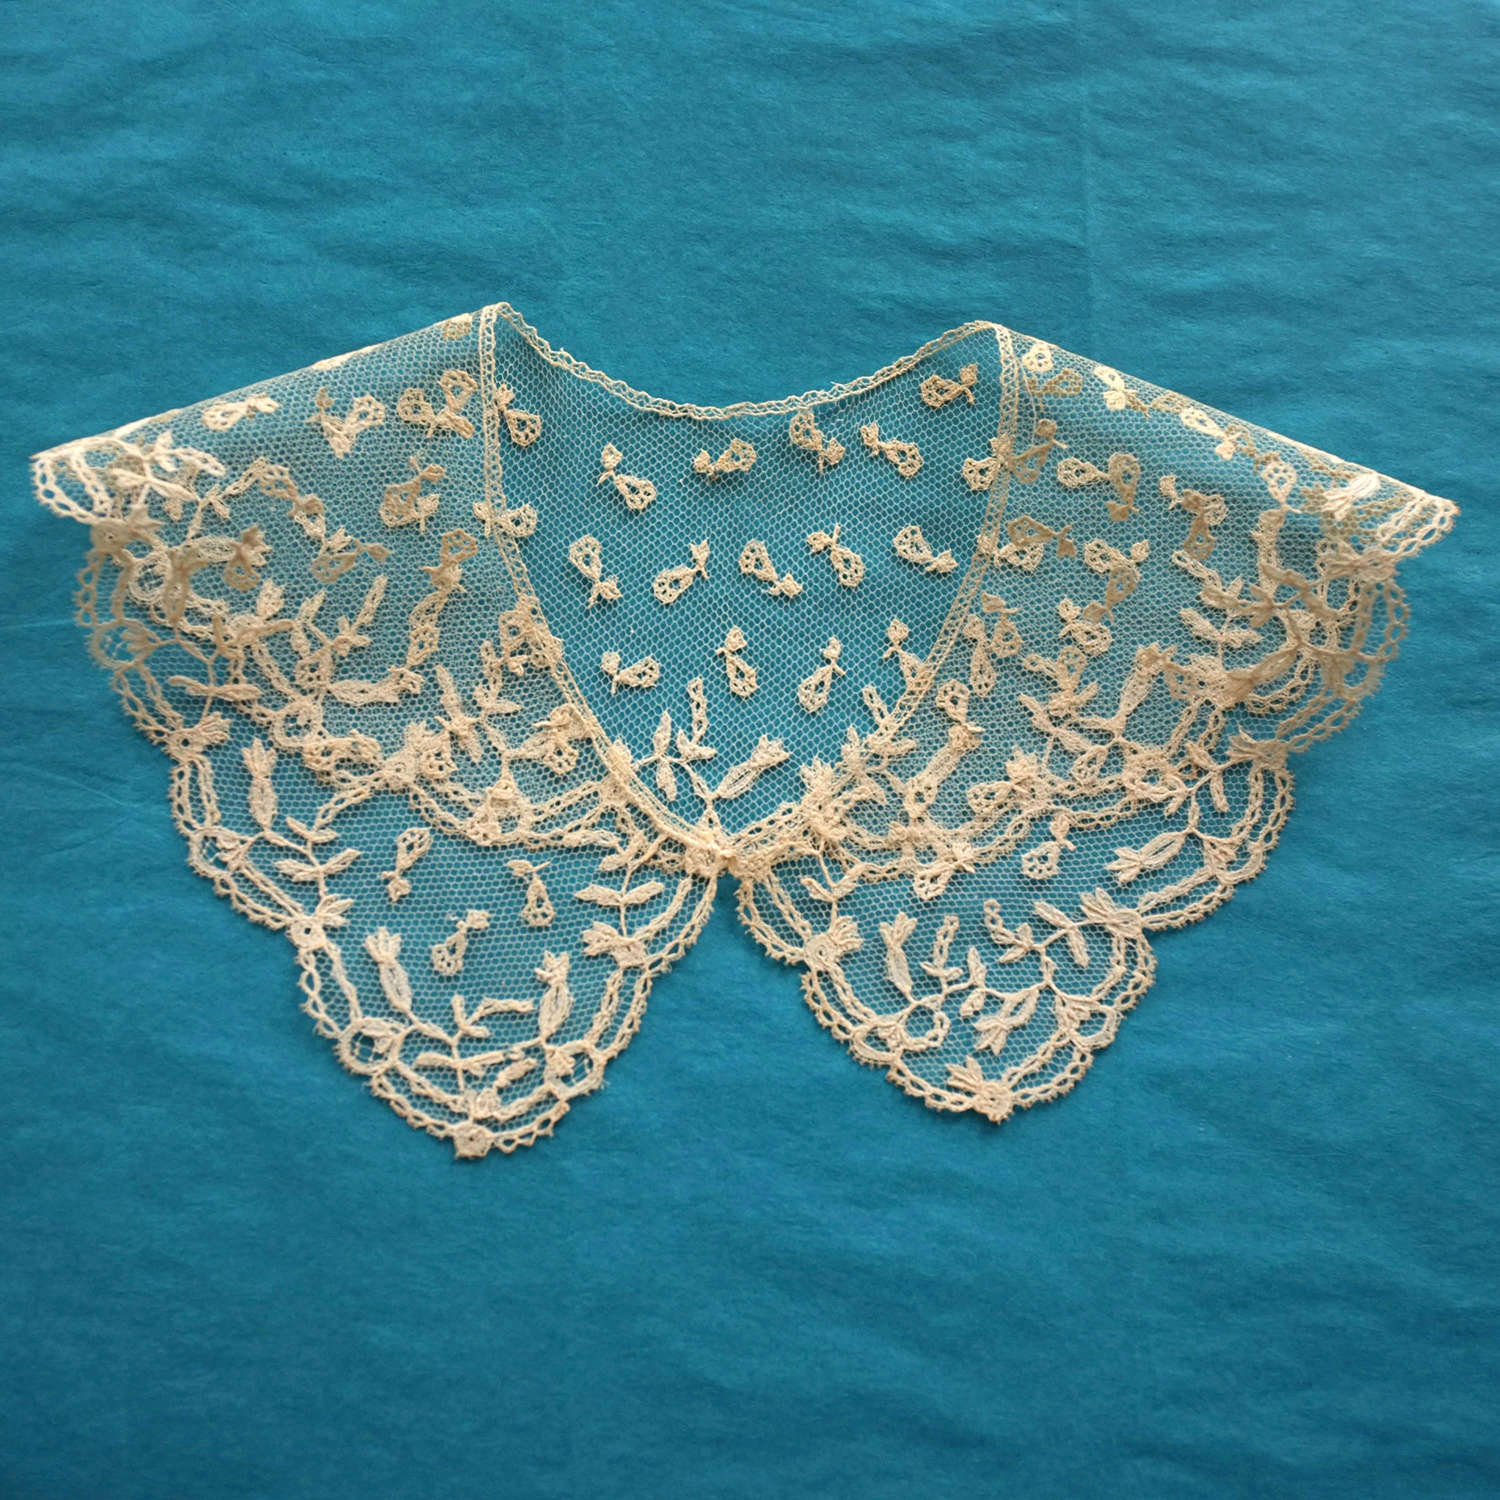 Antique 19th Century Sprigged Brussels Applique Lace Collar